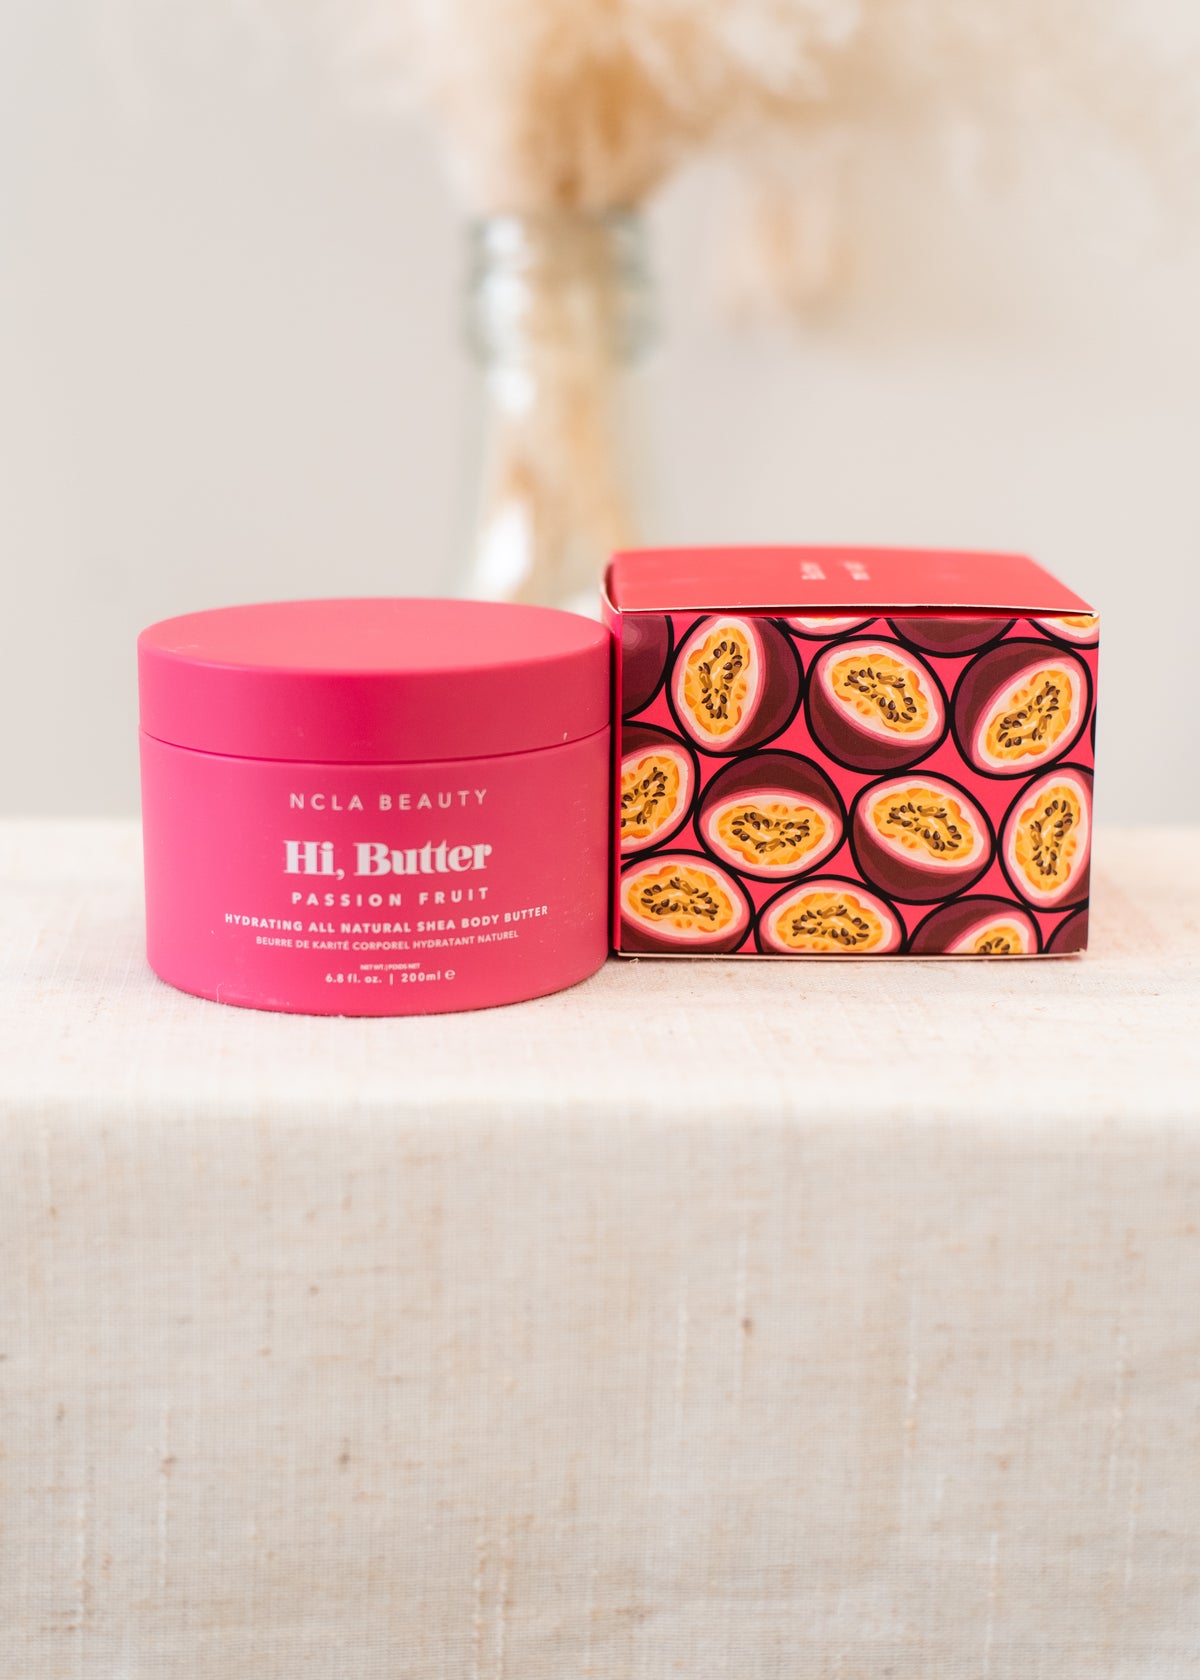 The Hi, Butter Natural Body Butters